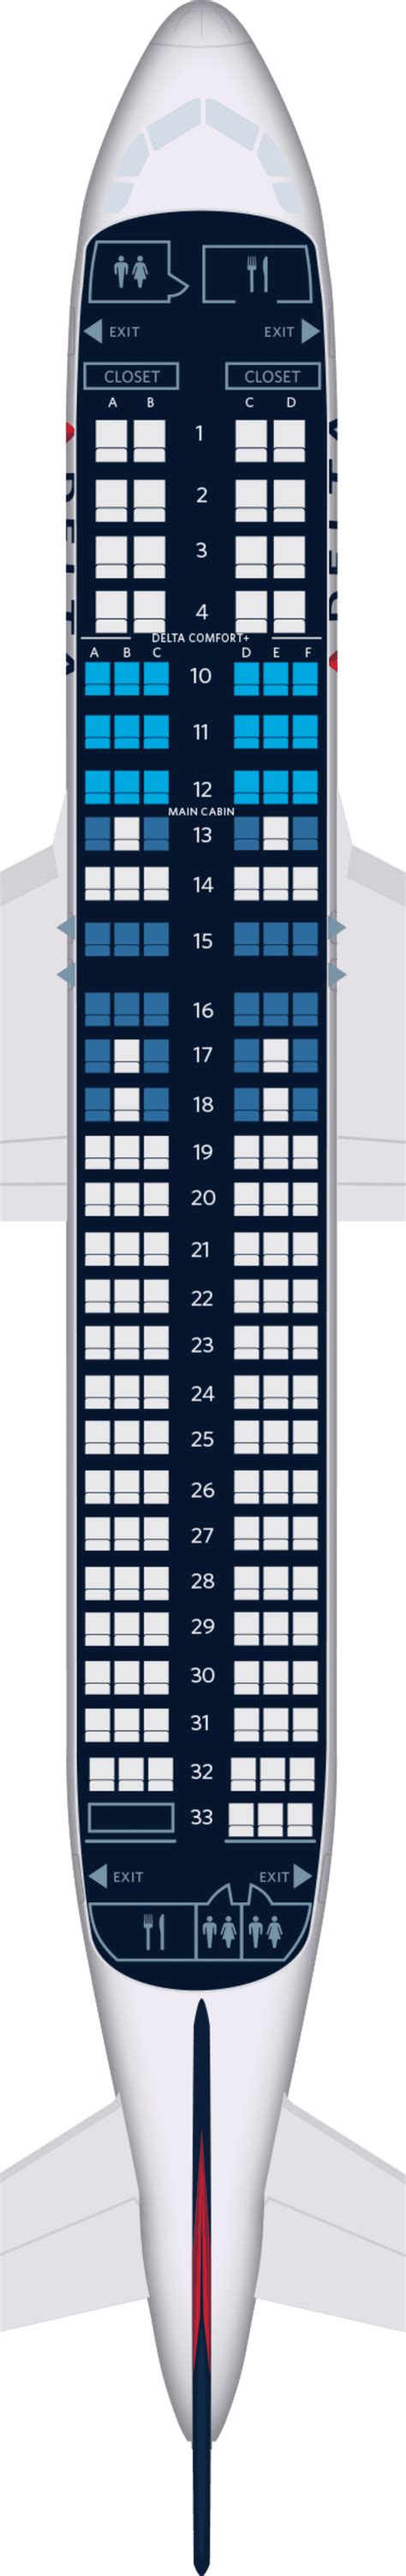 Airbus A320 Seating Map Image To U